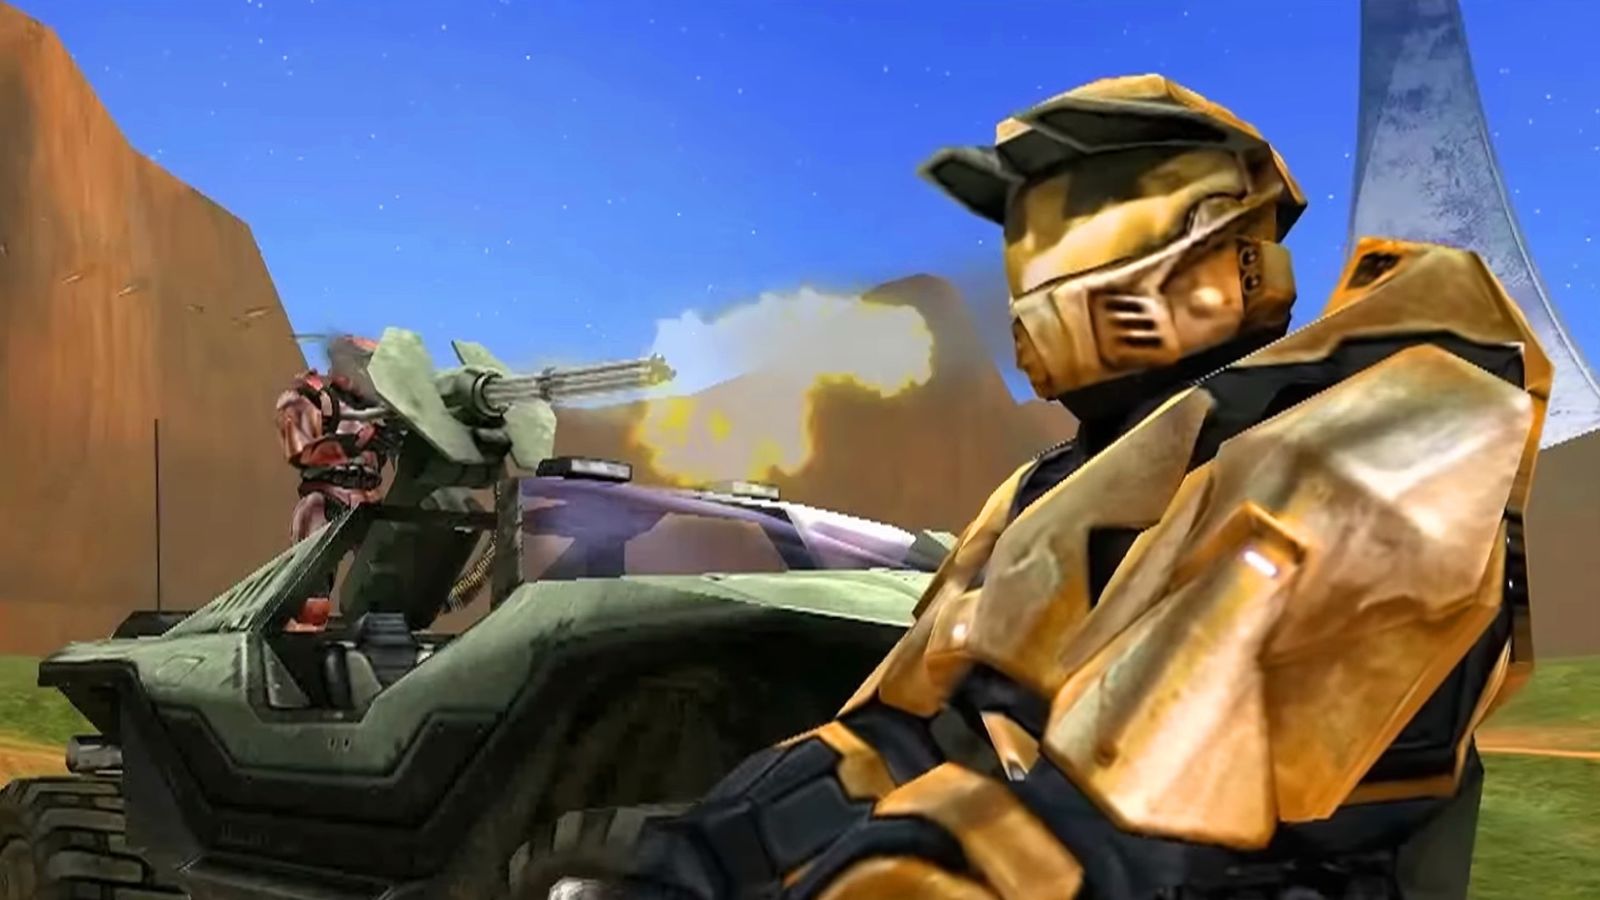 Red vs Blue’s Simmons firing a warthog turret while Grif stands next to them 